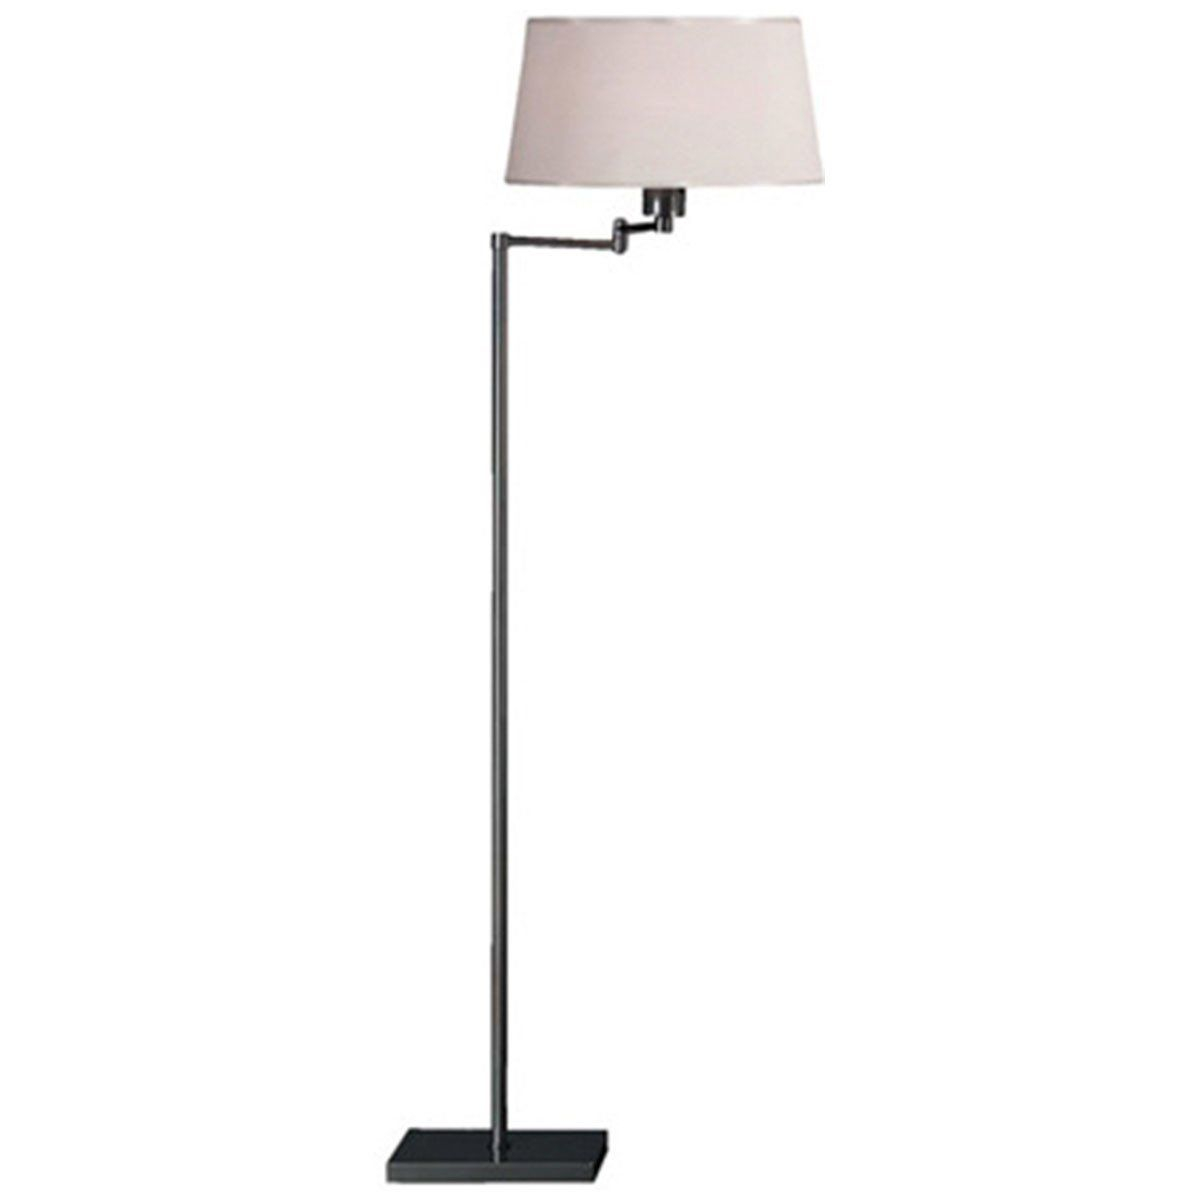 Robert Abbey Real Simple Swing Arm Floor Lamp Products intended for dimensions 1200 X 1200